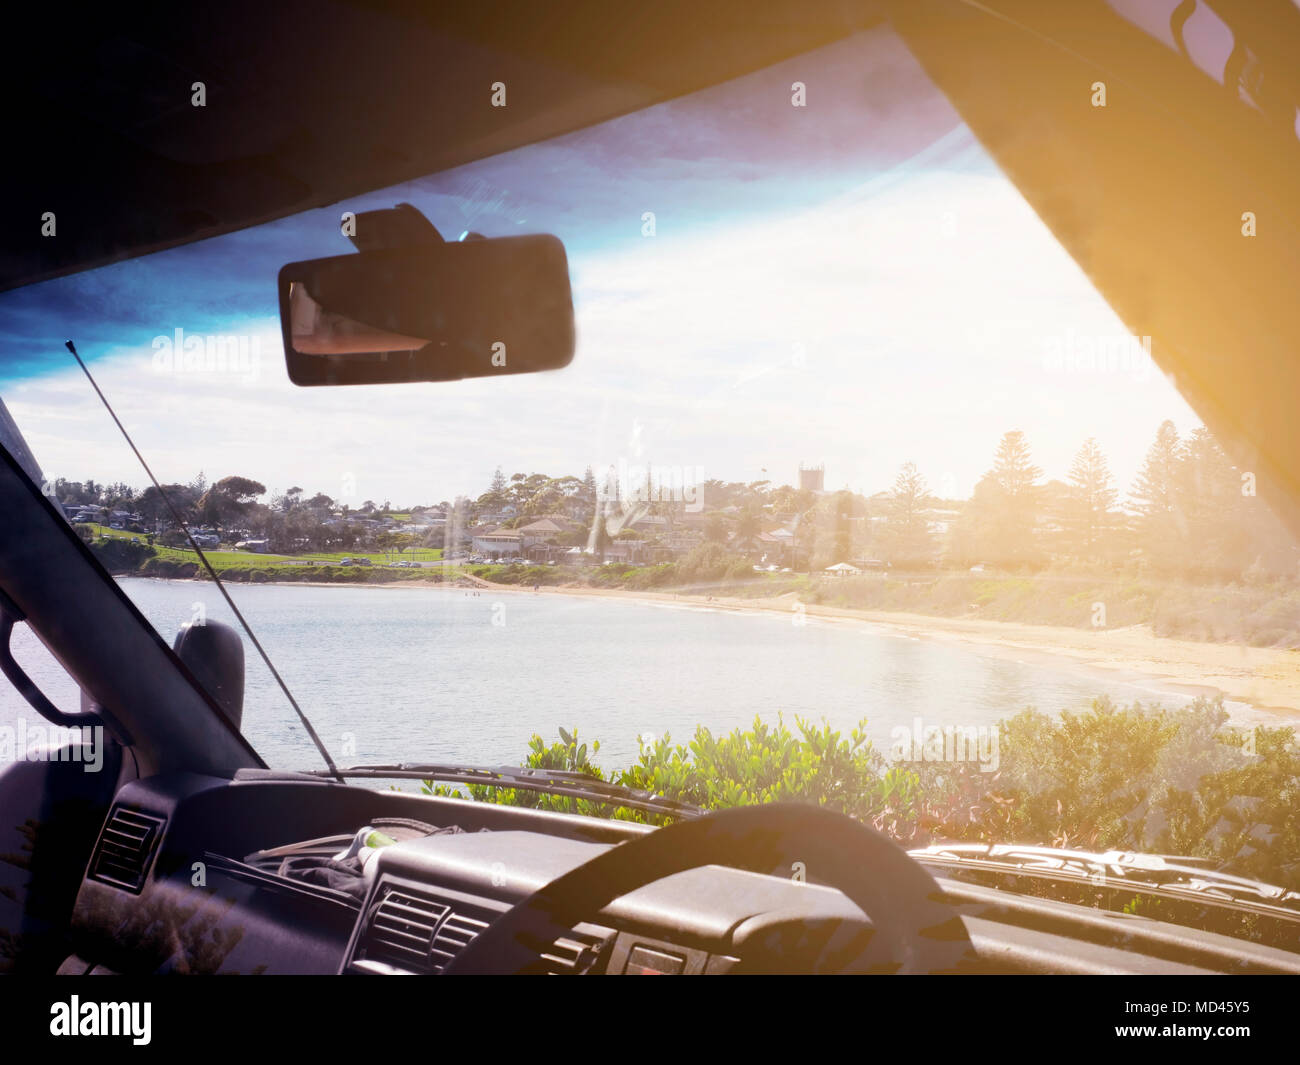 View of Bermagui, seen through windscreen of car, New South Wales, Australia Stock Photo